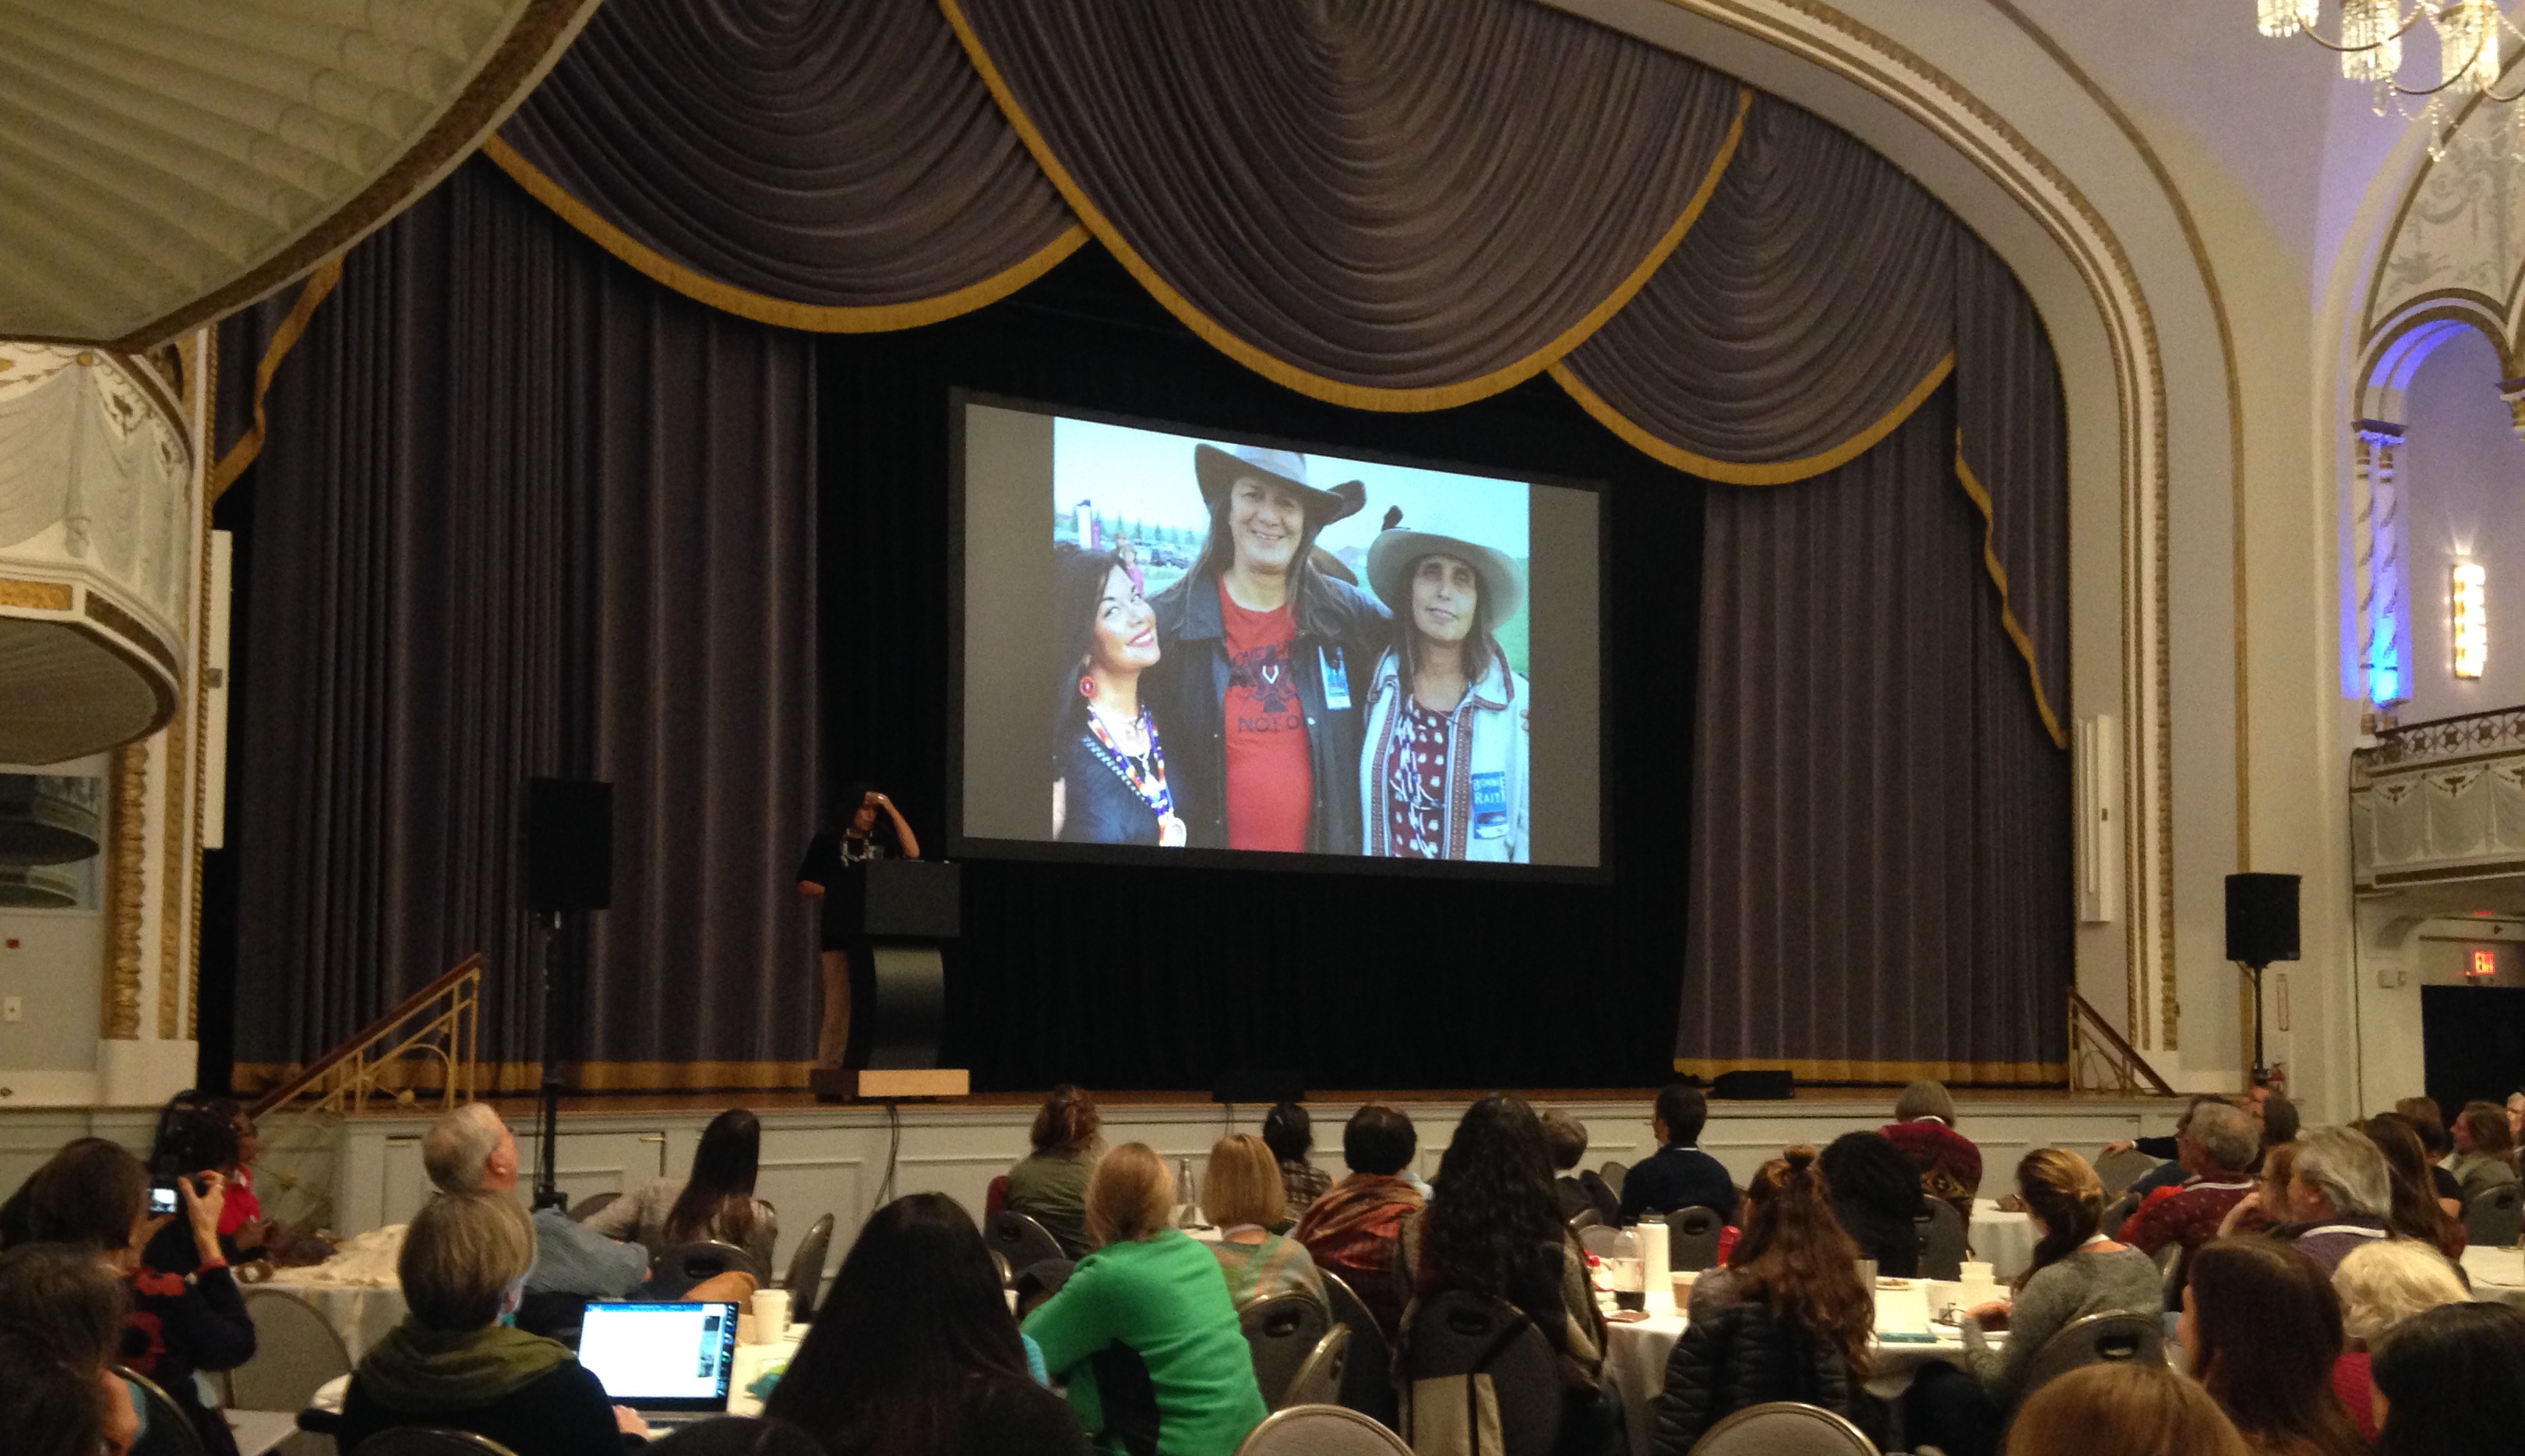 Winona LaDuke gives the keynote speech at the Community Food Systems Conference